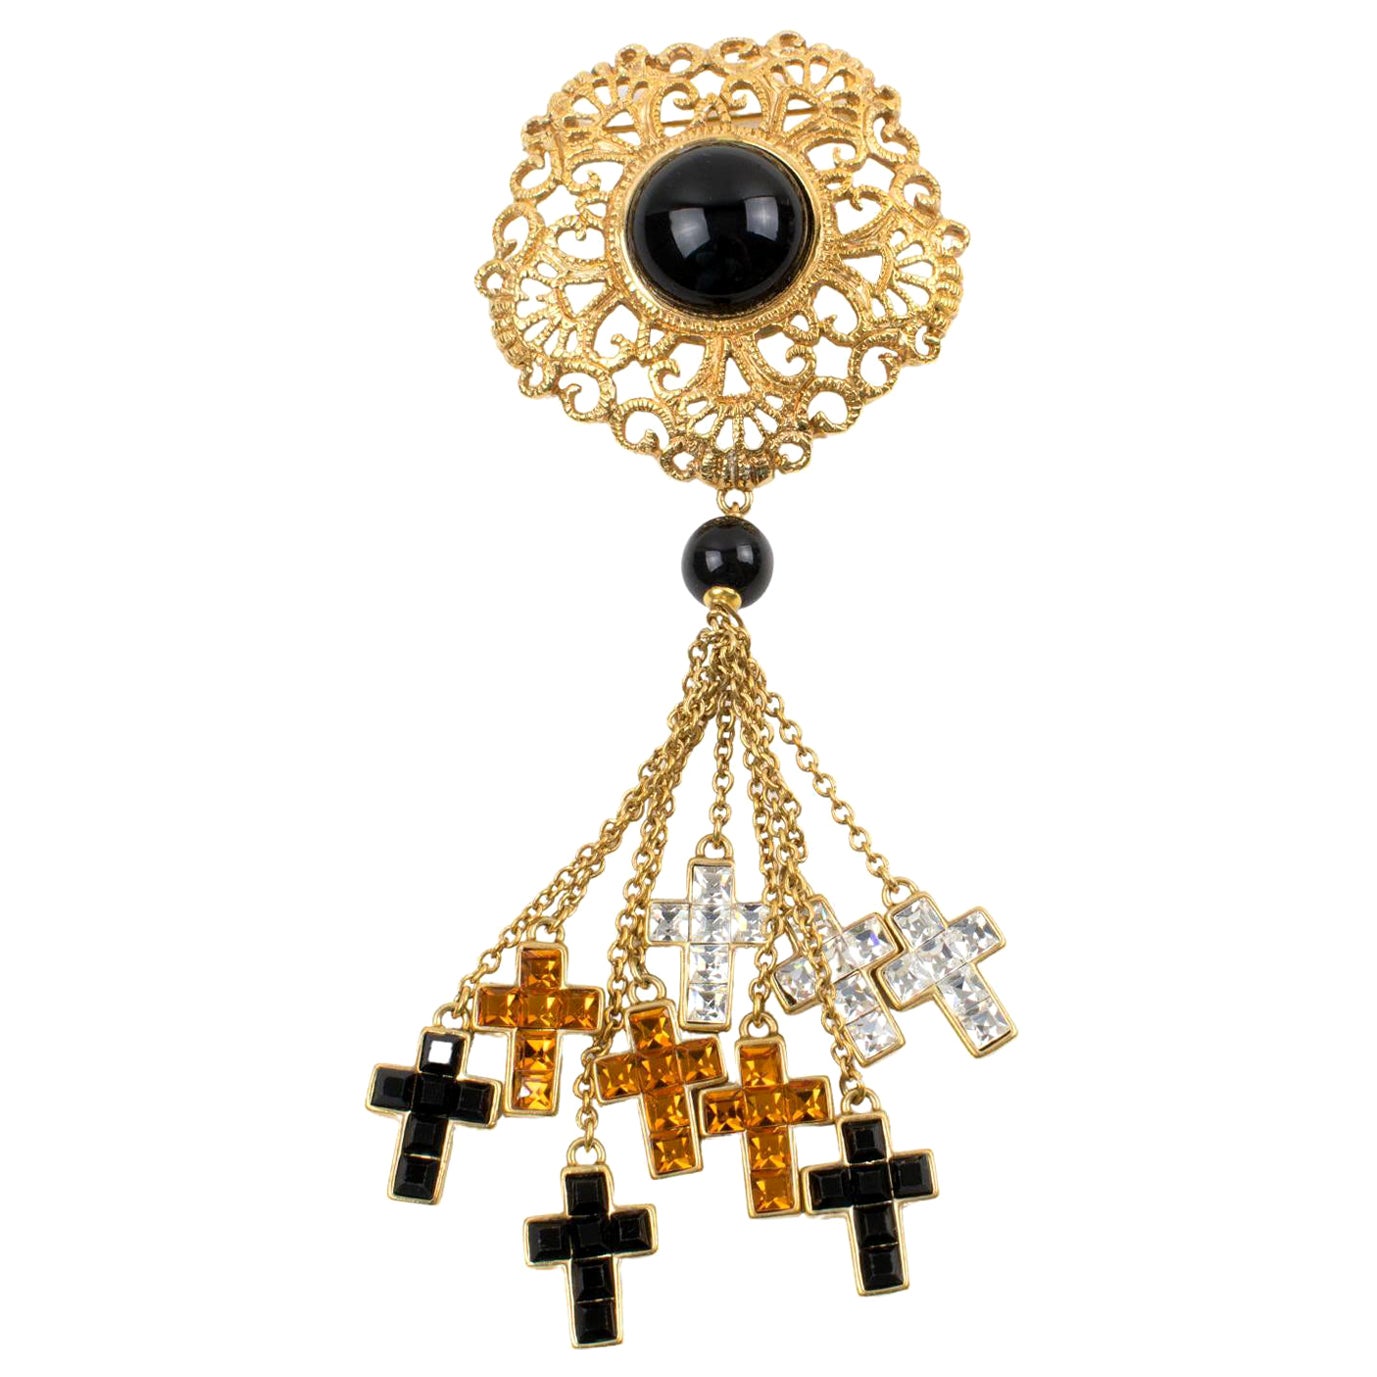 Valentino Black and Orange Jeweled Pin Brooch Dangling Cross Charms